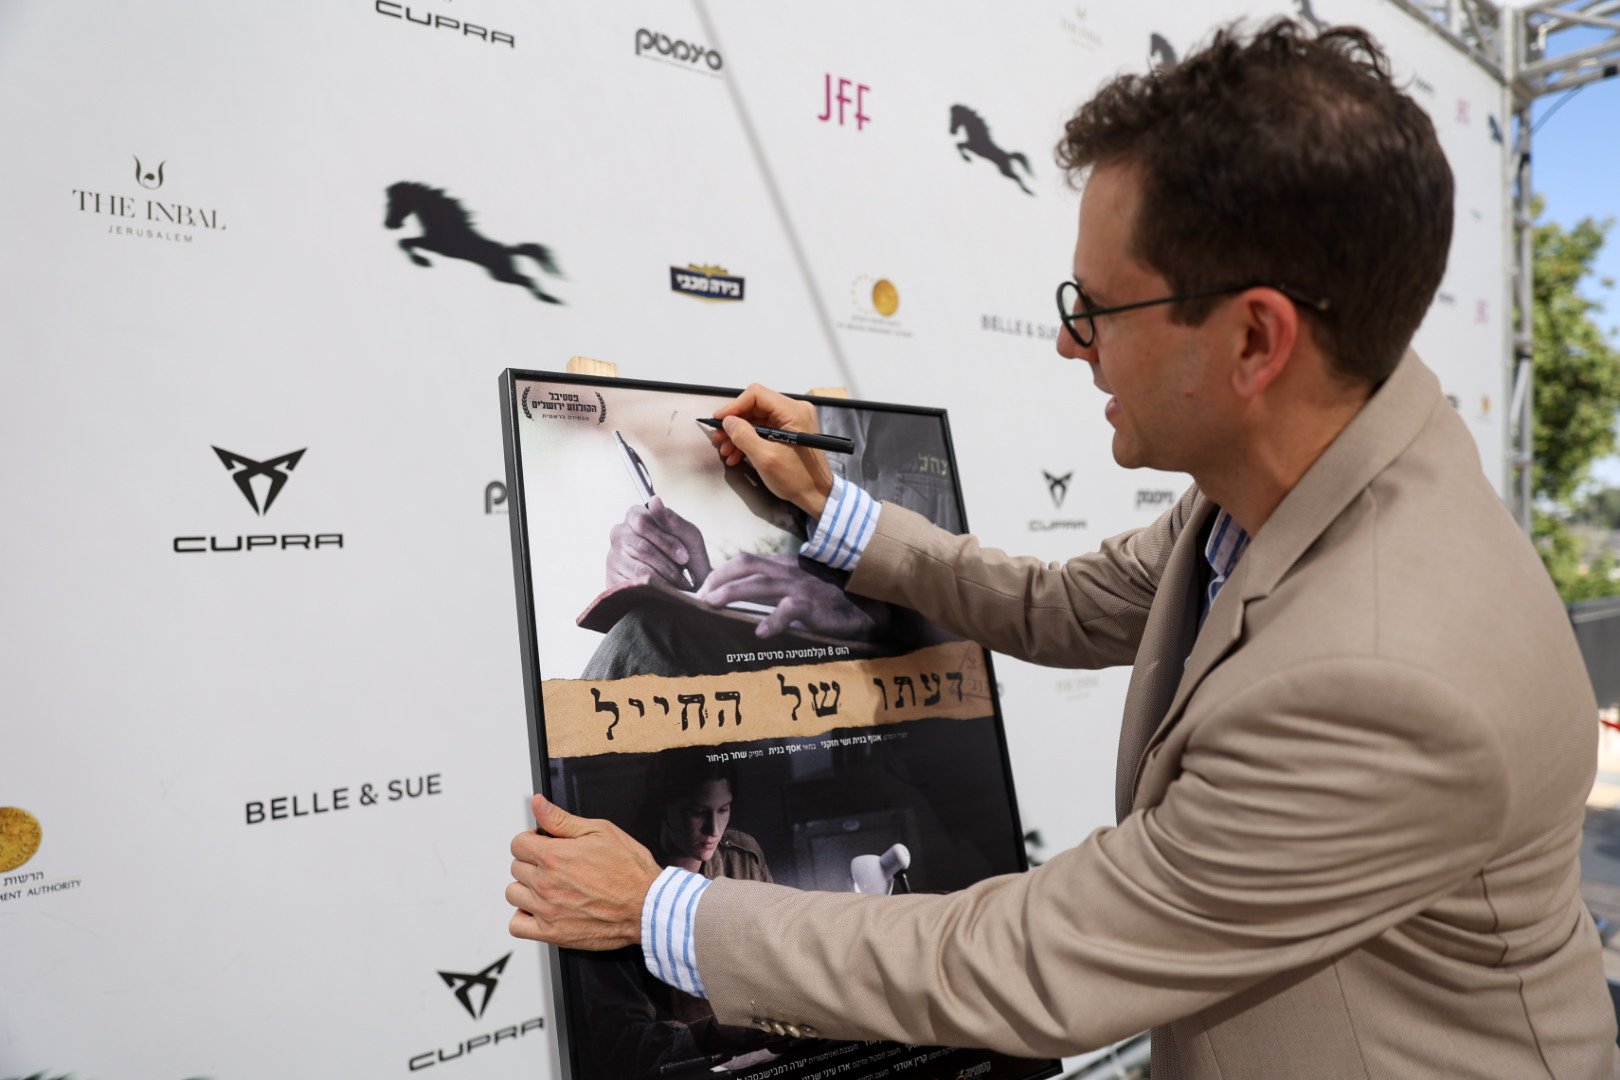 Hazkani signing: The Soldier's Opinion Hebrew Poster